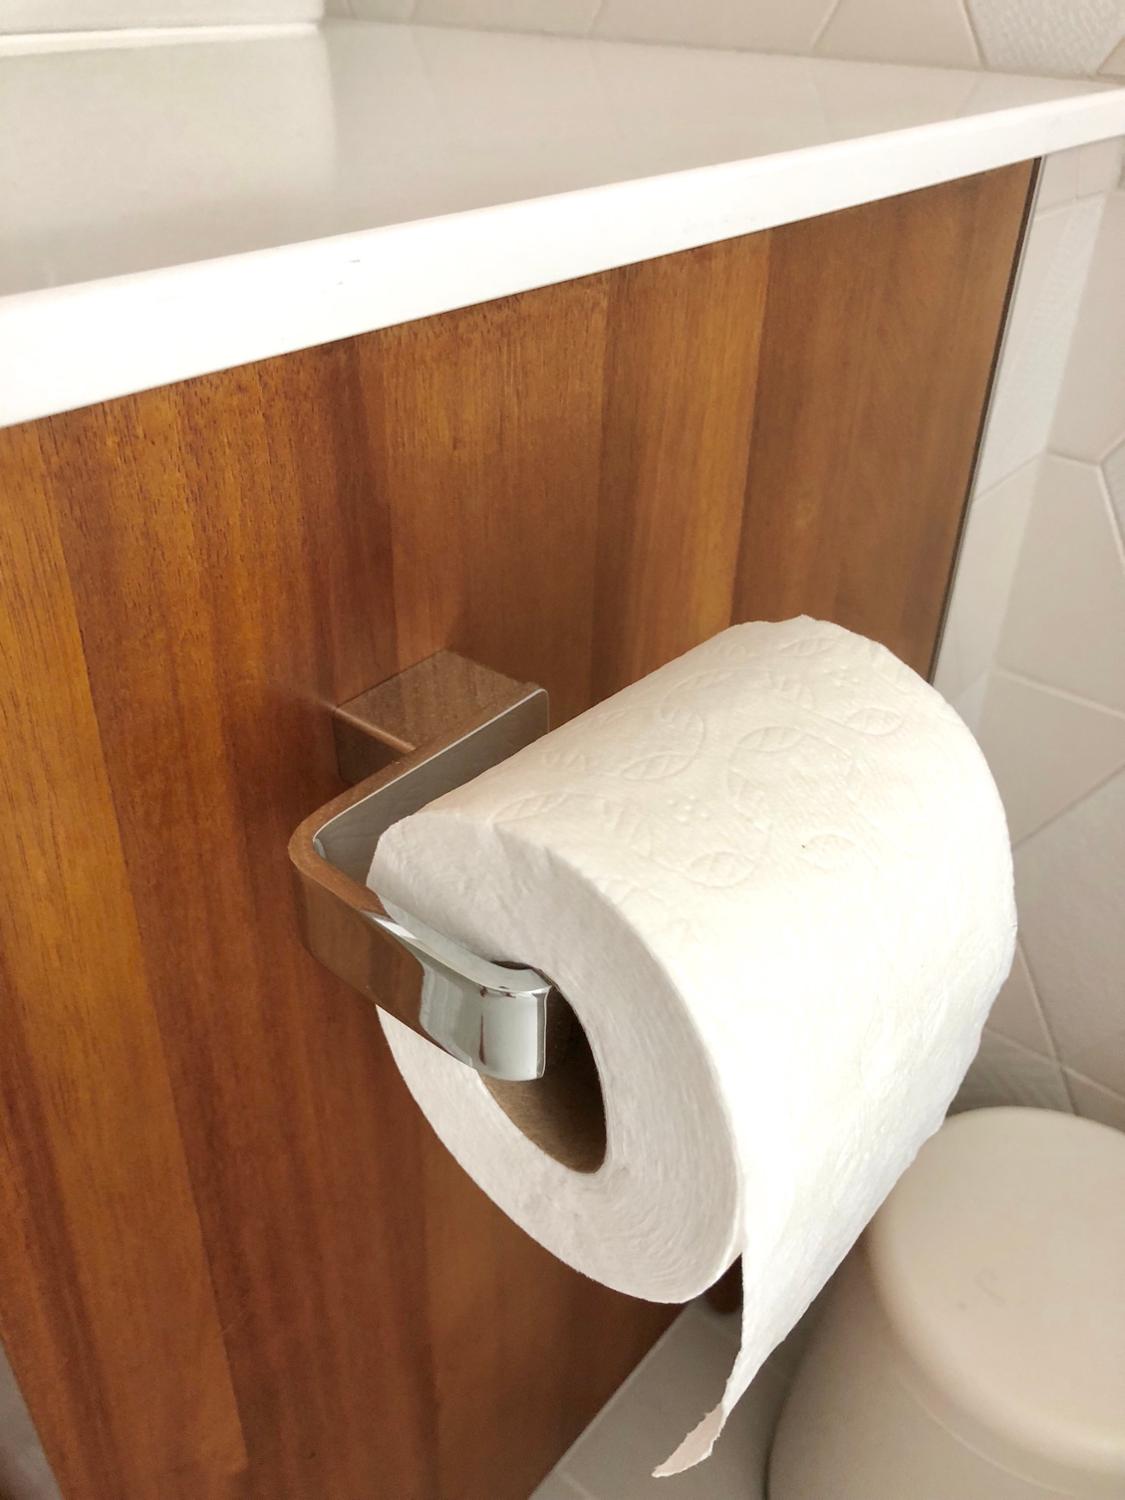 Gedy by Nameeks Hot Wall Mounted Toilet Paper Holder HO24